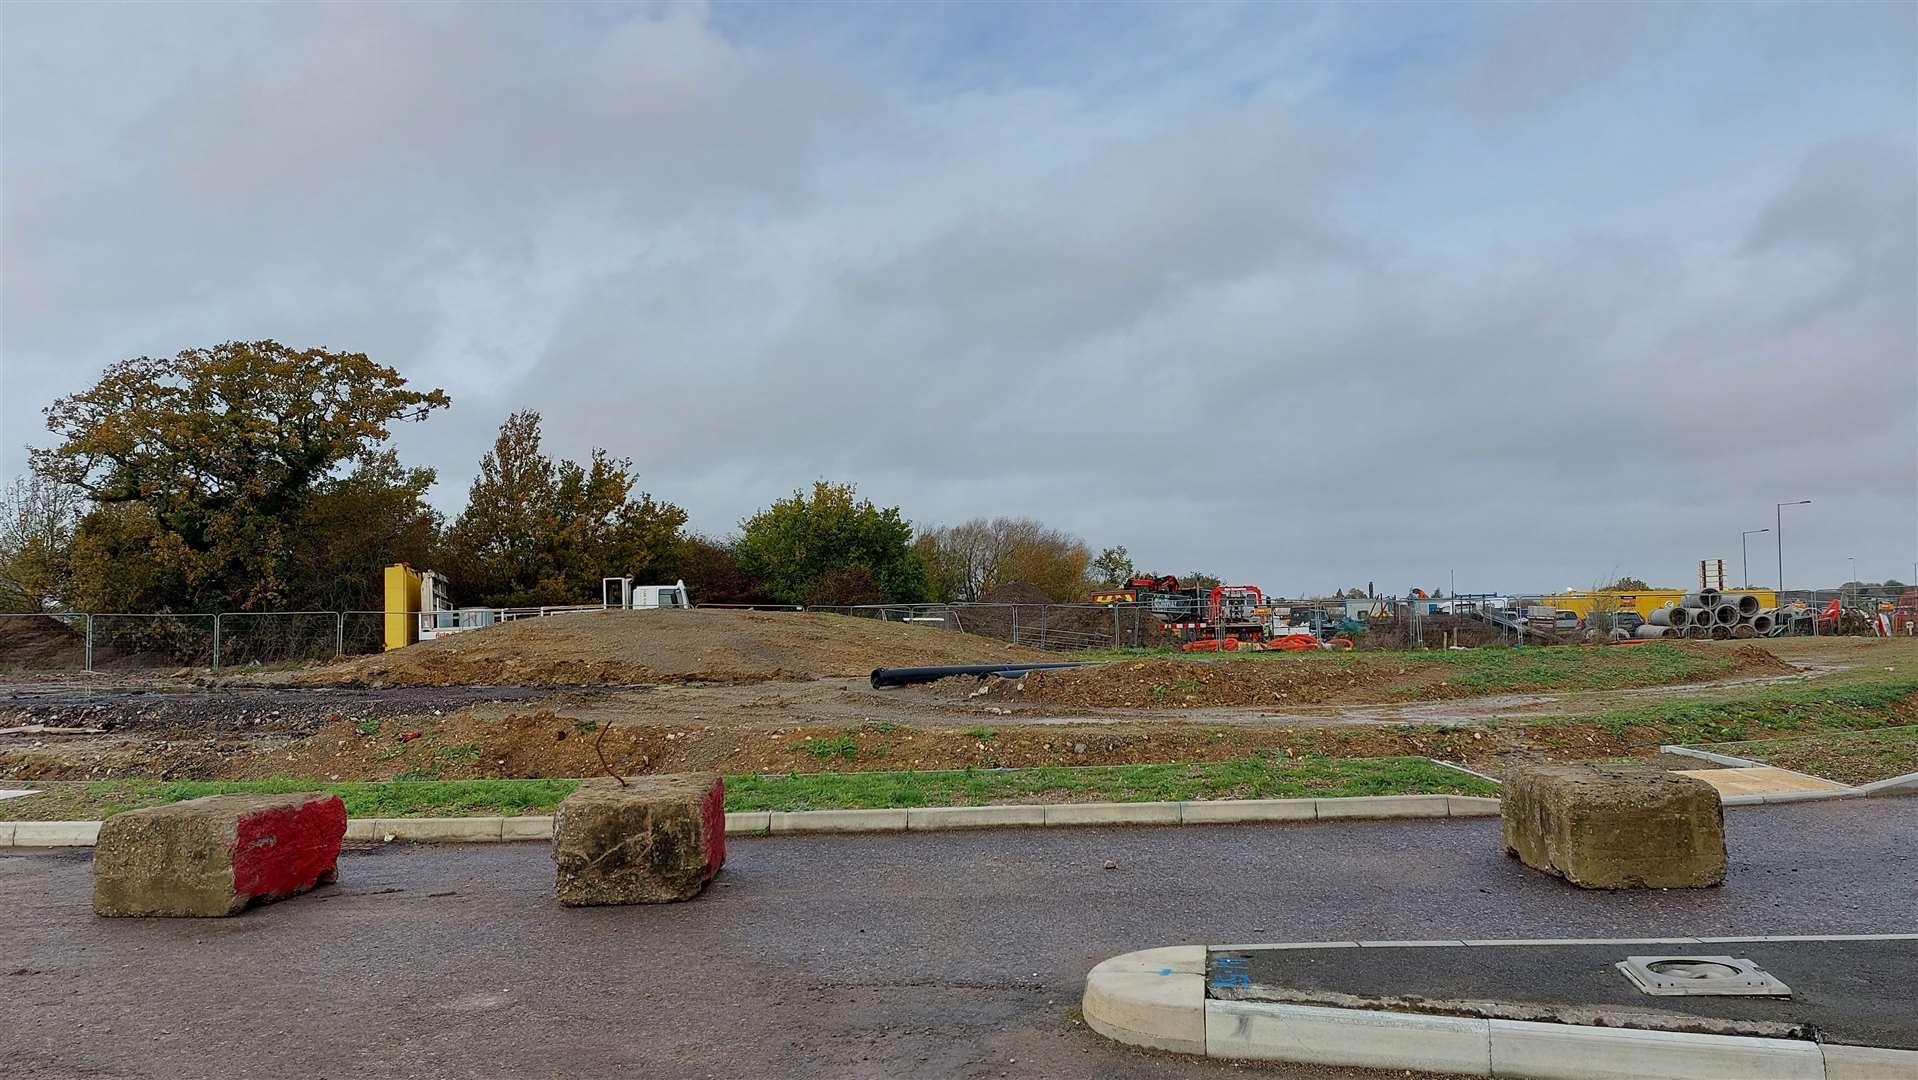 This land will be turned into an Aldi store